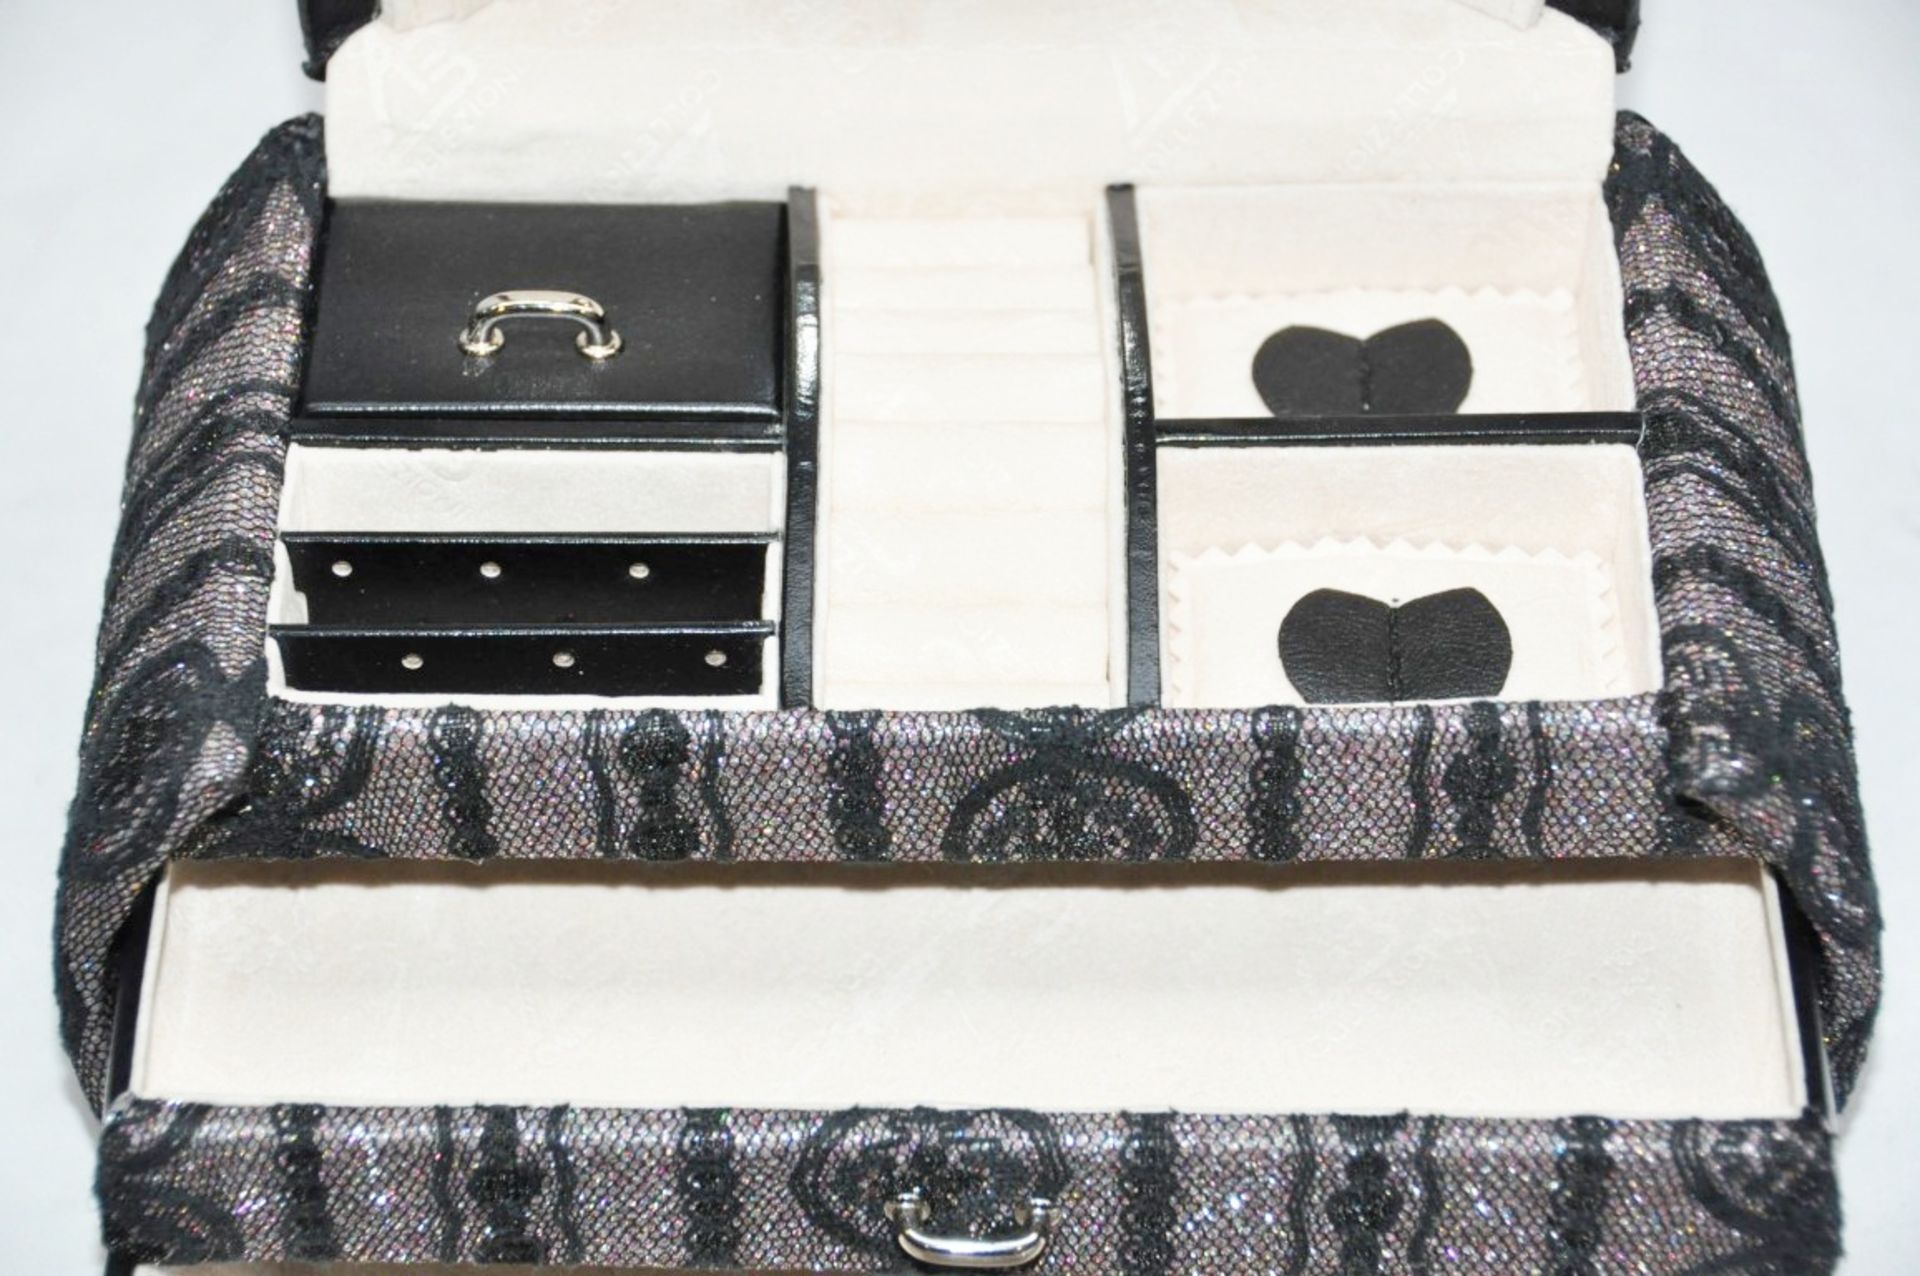 1 x "AB Collezioni" Italian Luxury Jewellery Box (31479N) - Ref LT095 – Includes 3 Pull-Out - Image 4 of 5